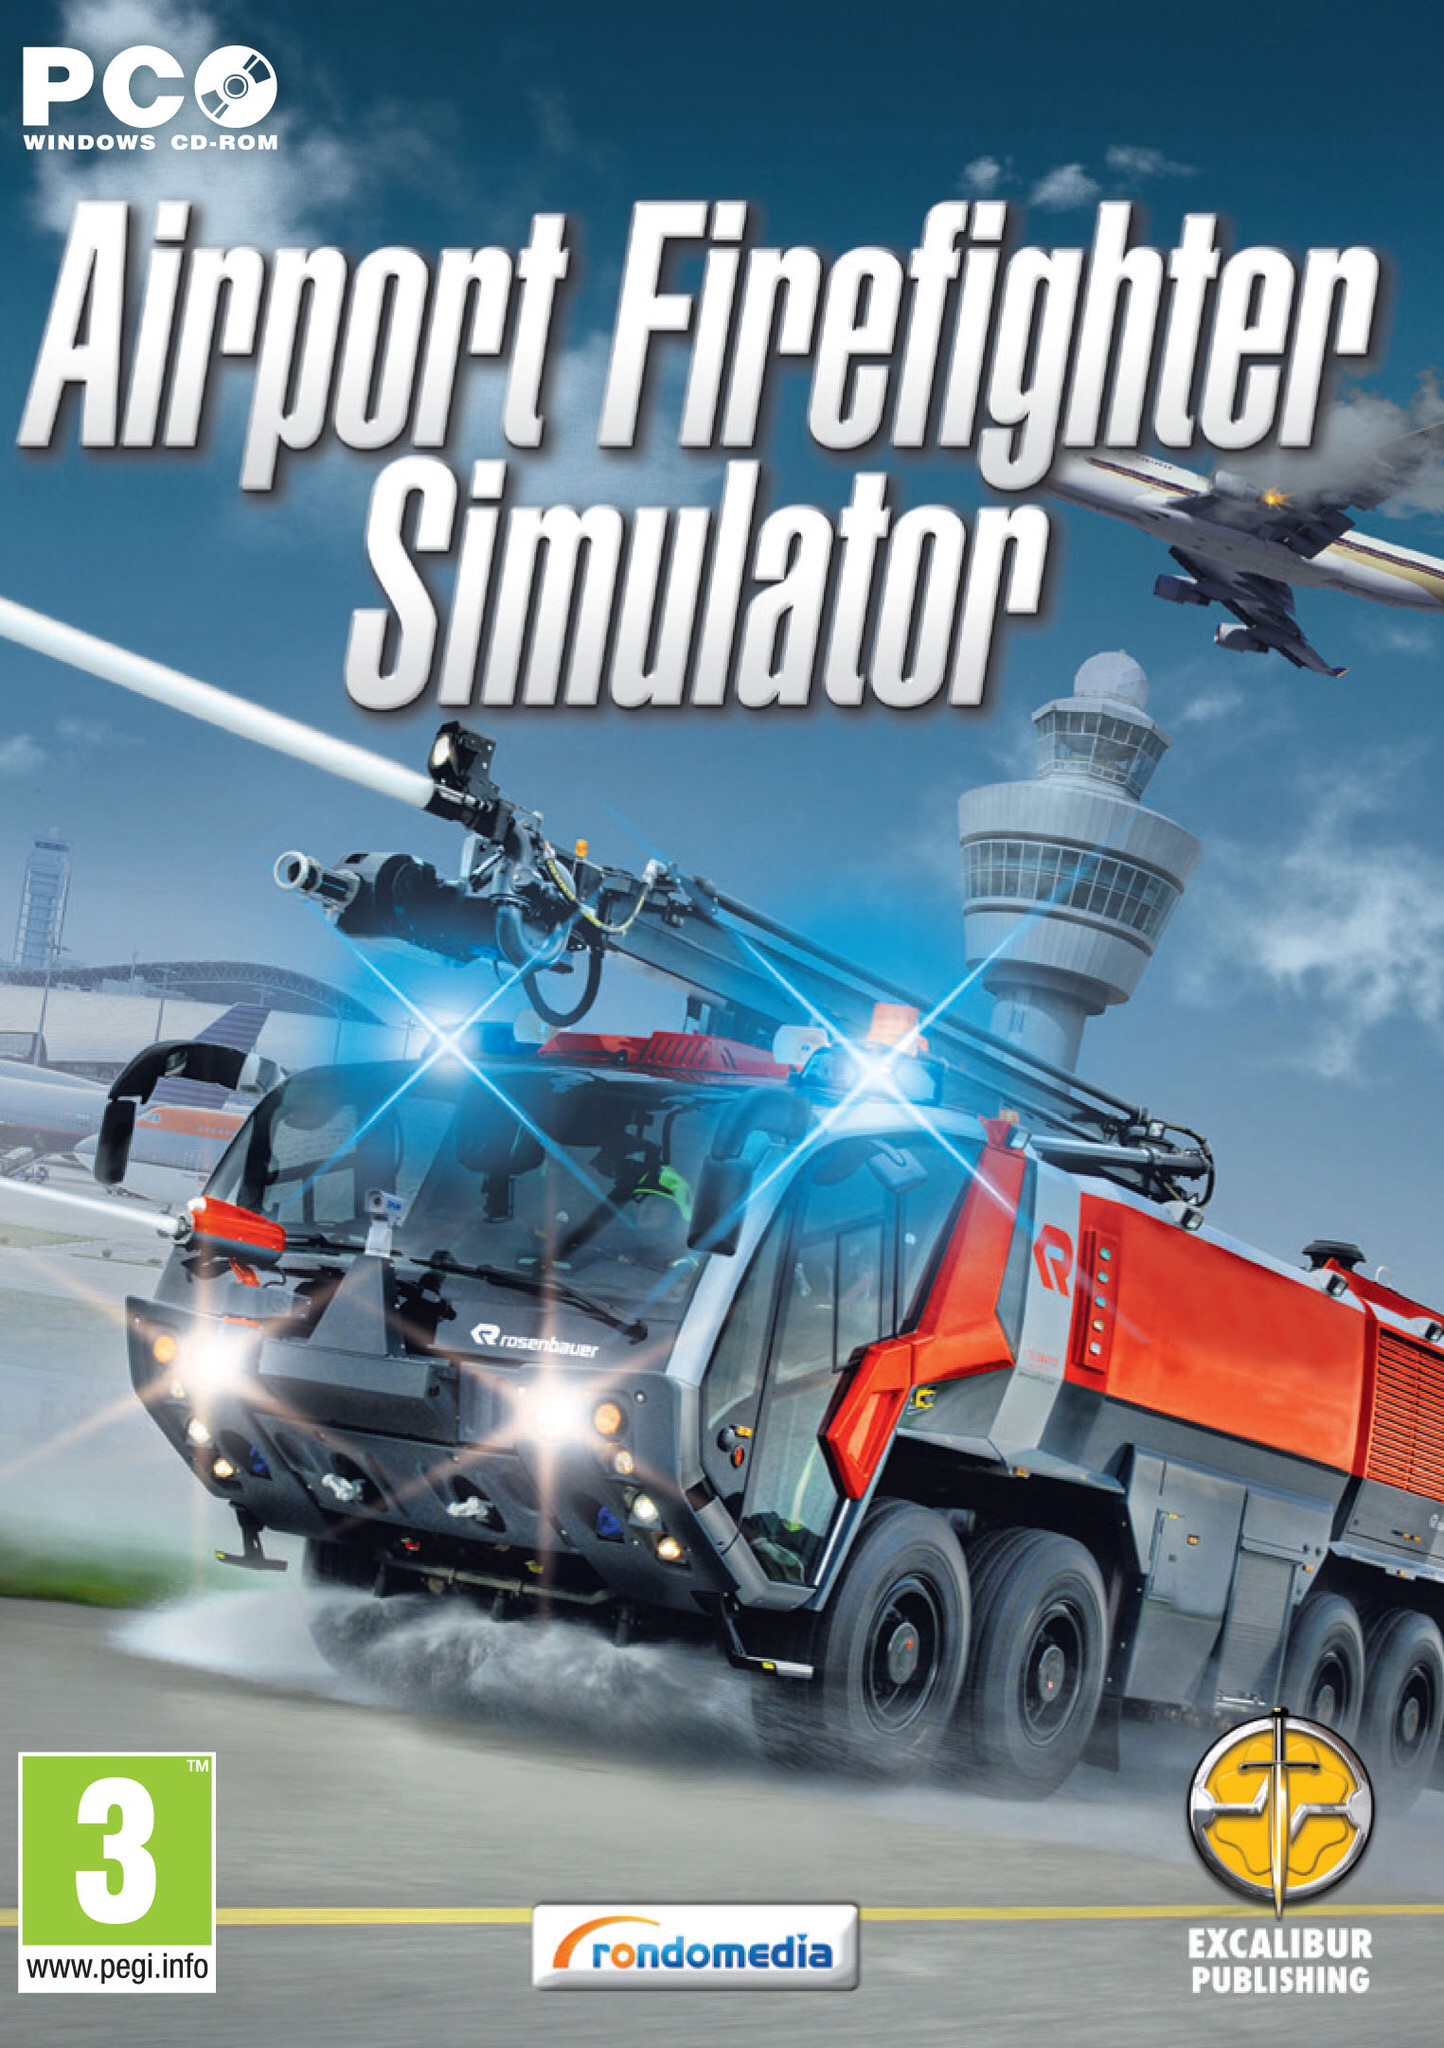 Airport Firefighters Simulation (PC), Excalibur Games